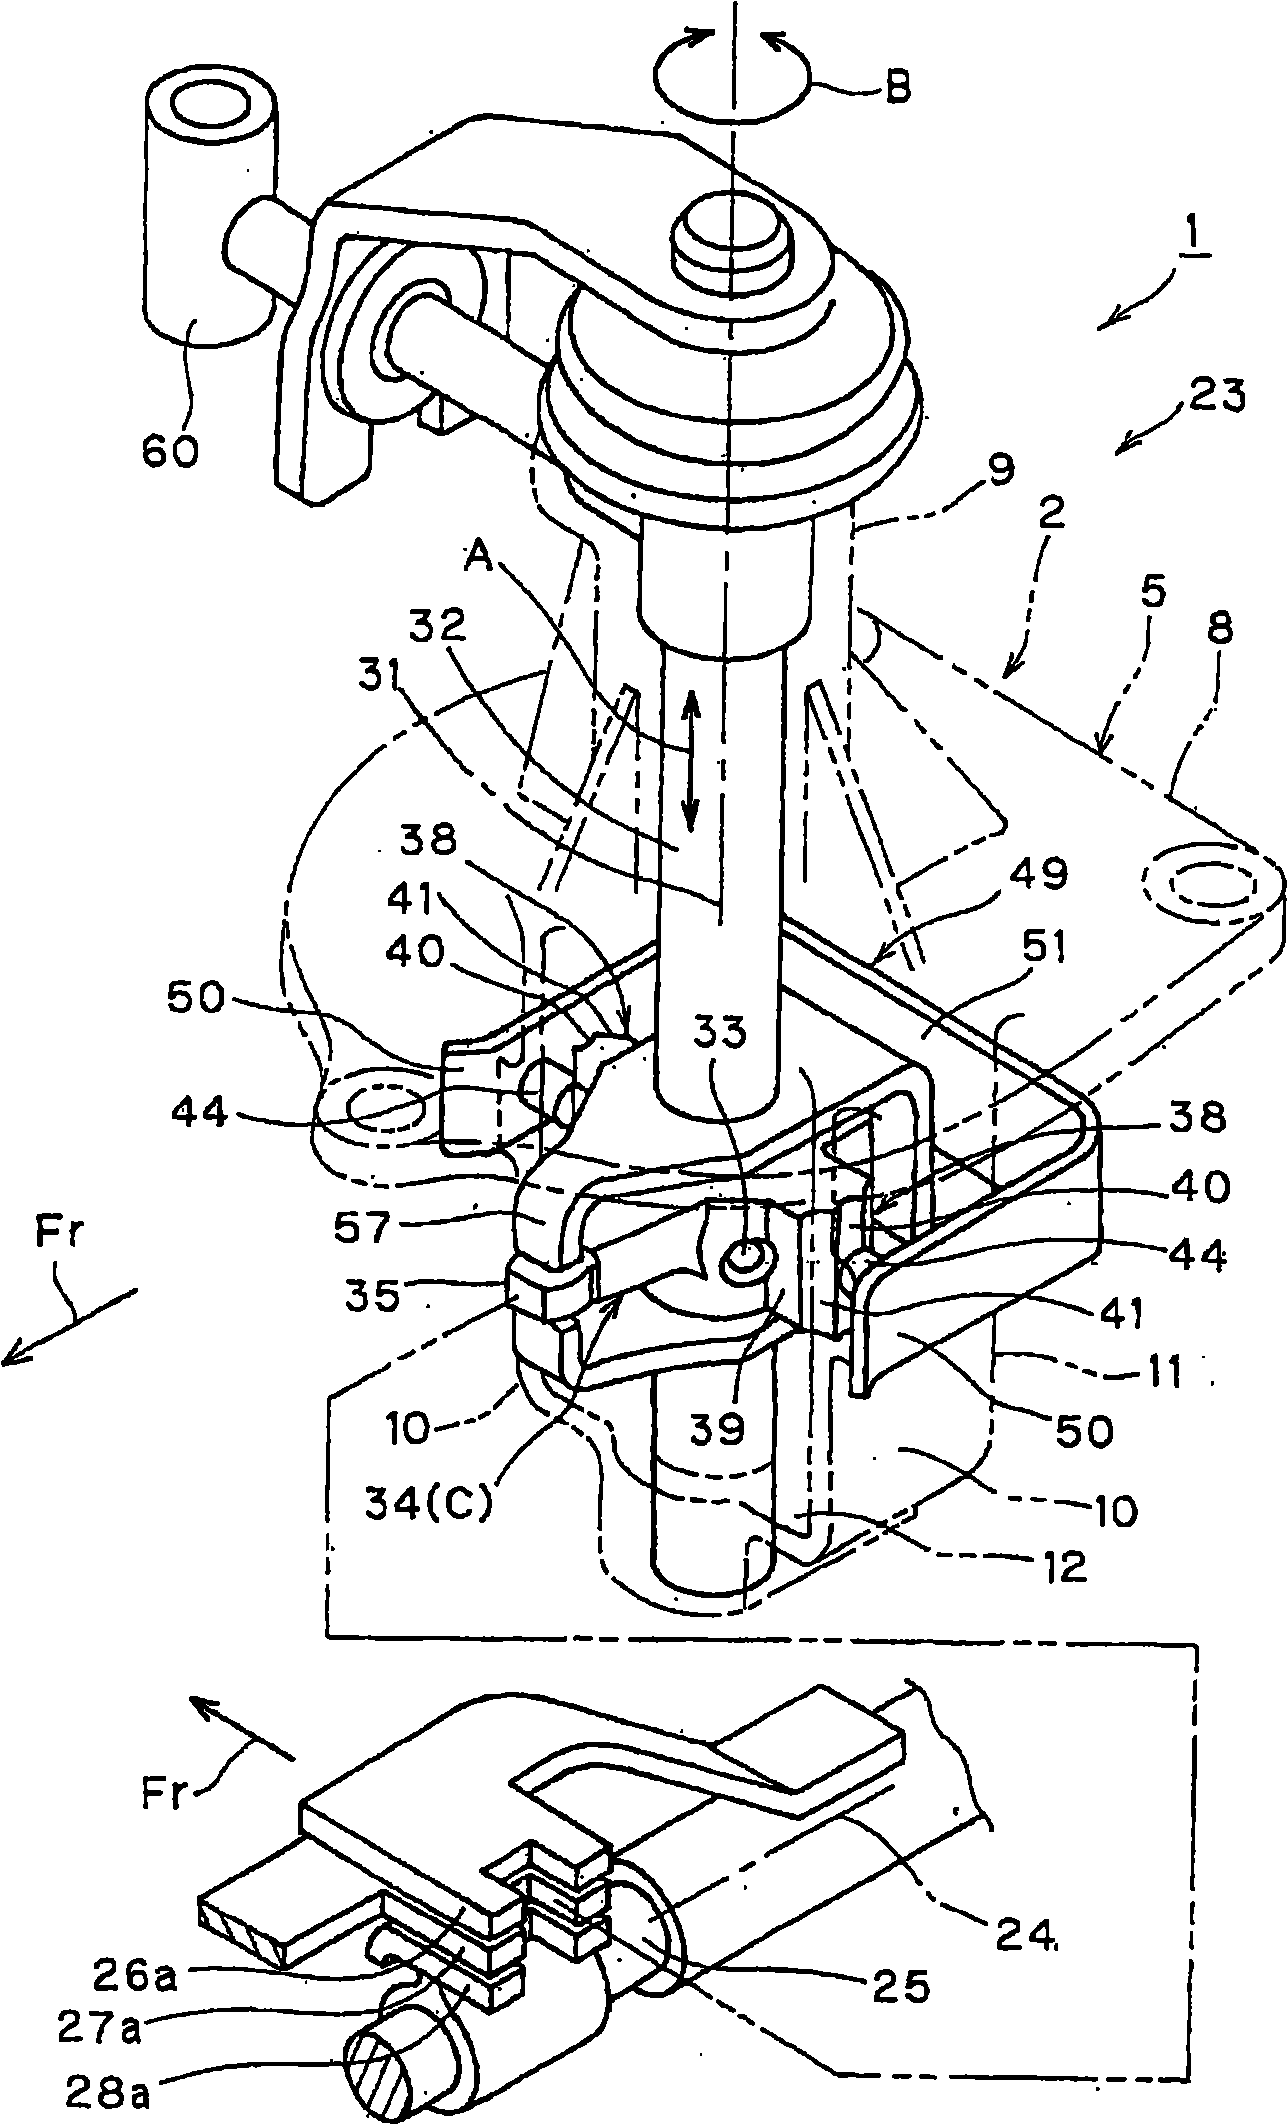 Shift control device for transmission